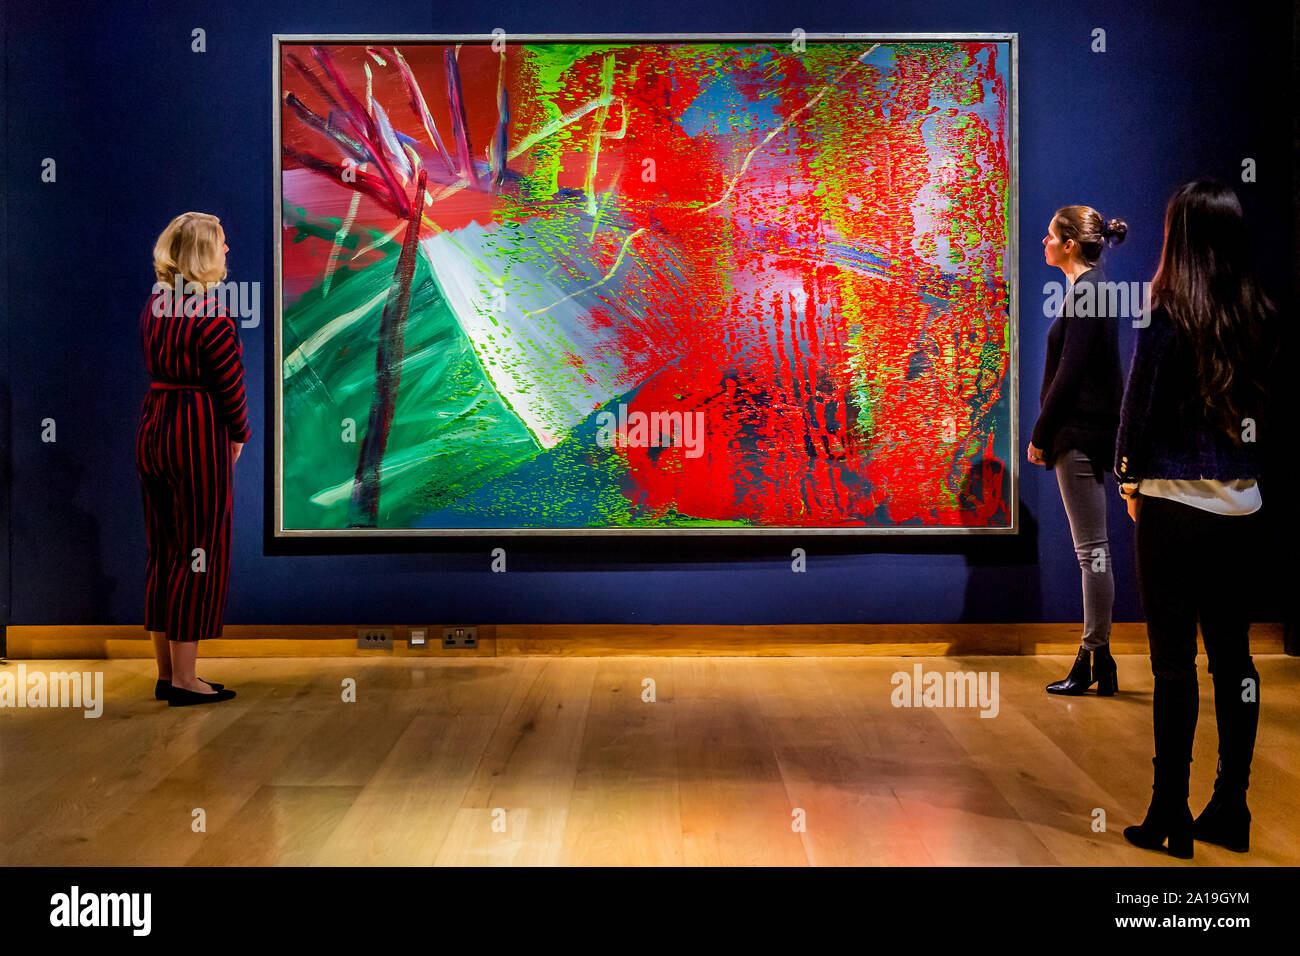 Christie’s, London, UK. 25th Sep 2019. Gerhard Richter, Abstraktes Bild, Painted in 1984, Est £6.5-9.5m, Post-War and Contemporary Art Evening Auction - Christie’s Frieze Week programme launch includes the private collection of Jeremy Lancaster (sale 1 October) and the Post-War and Contemporary Art Evening Auction (sale 4 Oct) amongst other sales. Credit: Guy Bell/Alamy Live News Stock Photo